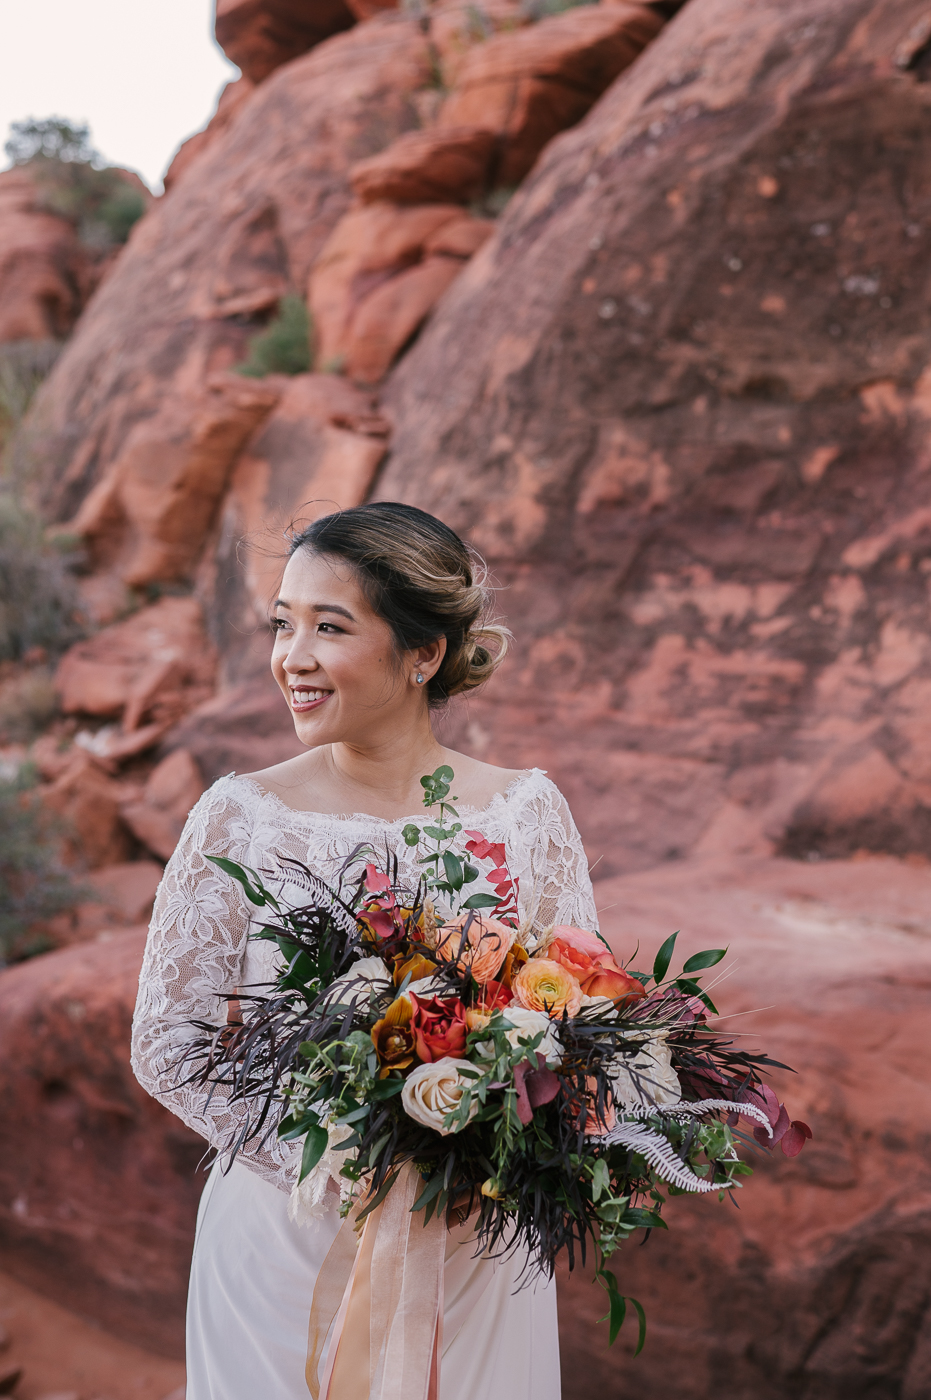 The beautiful bride in her all white wedding dress with lace detailing on the top. Holding her wedding bouquet mixed with flowers, greenery and lavender in Ash Springs.